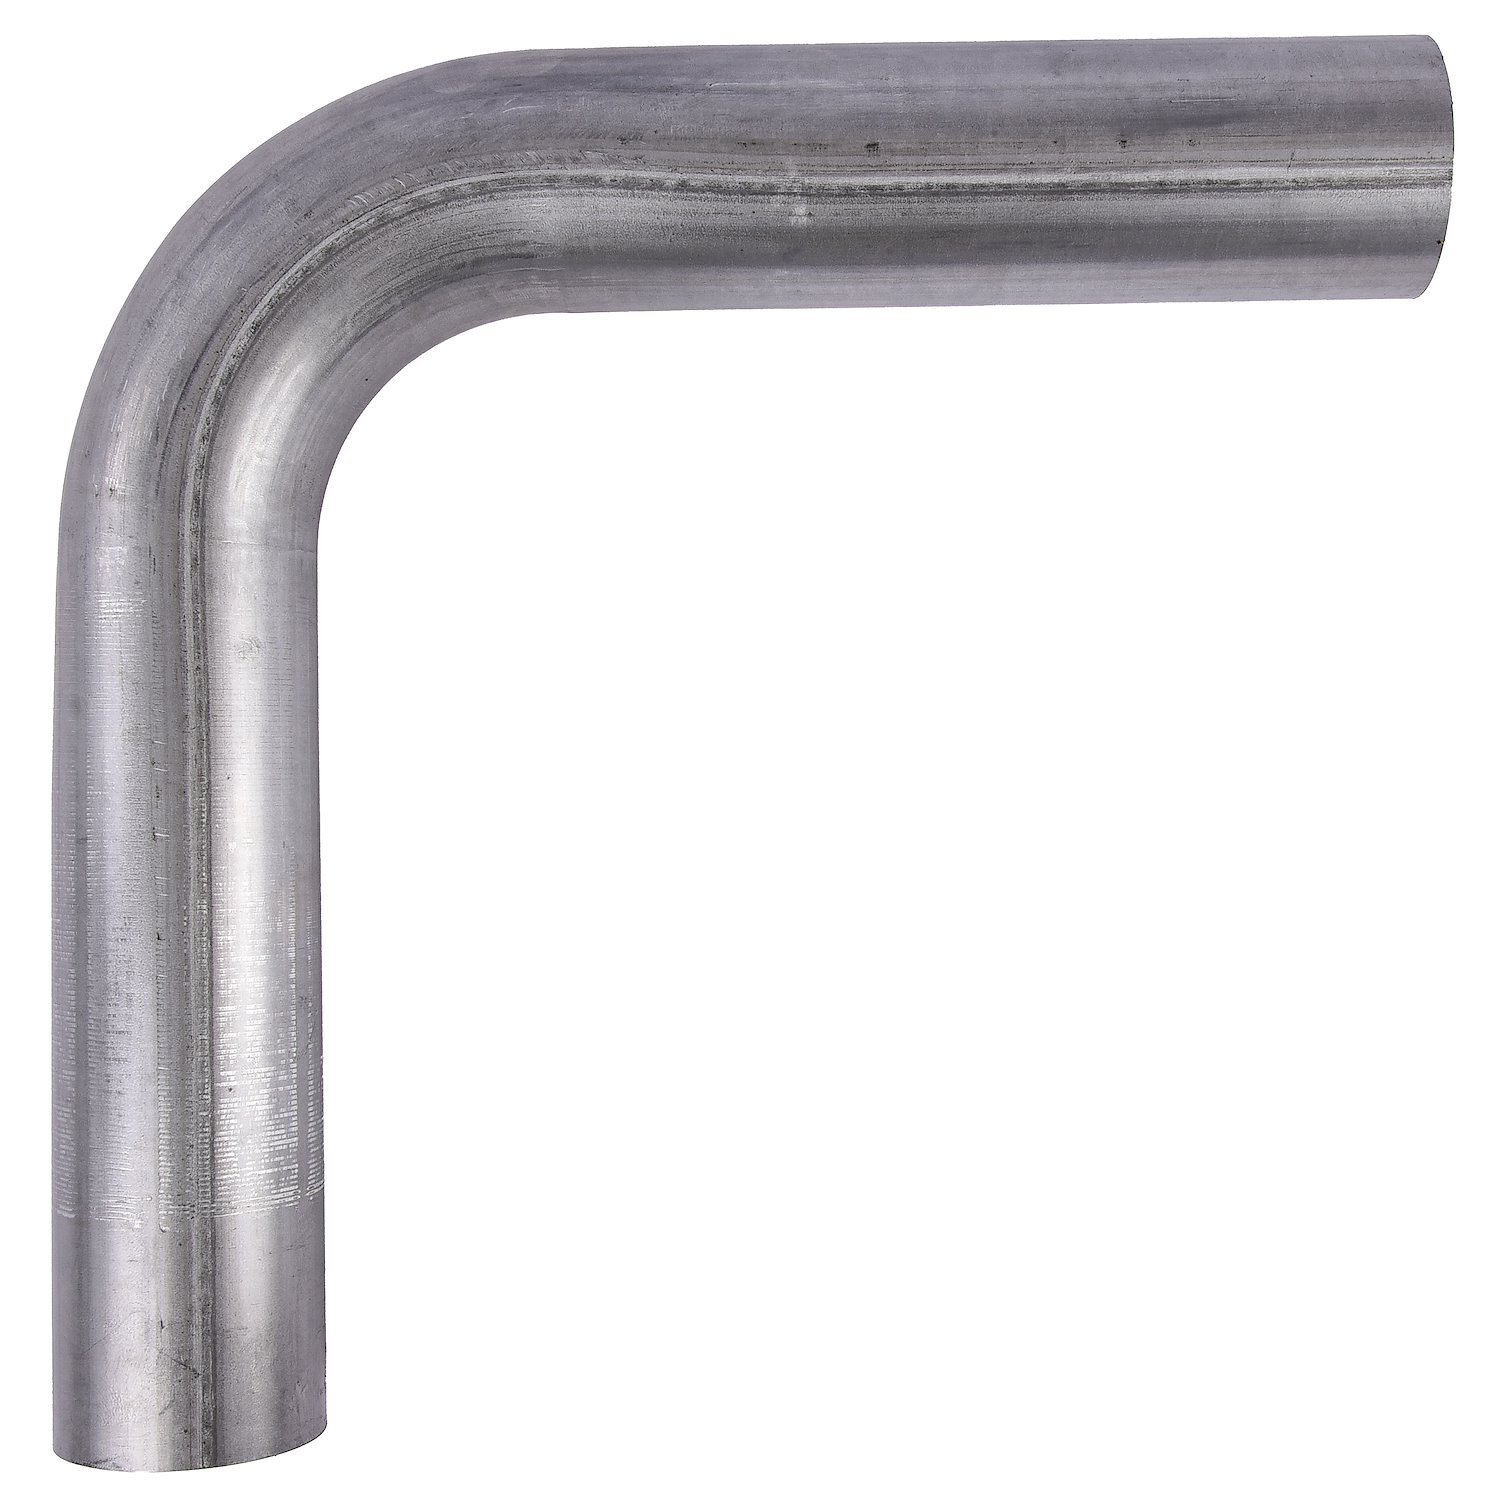 Exhaust Elbow Aluminized Steel [90-Degree Bend, 3 in. Outer Diameter]